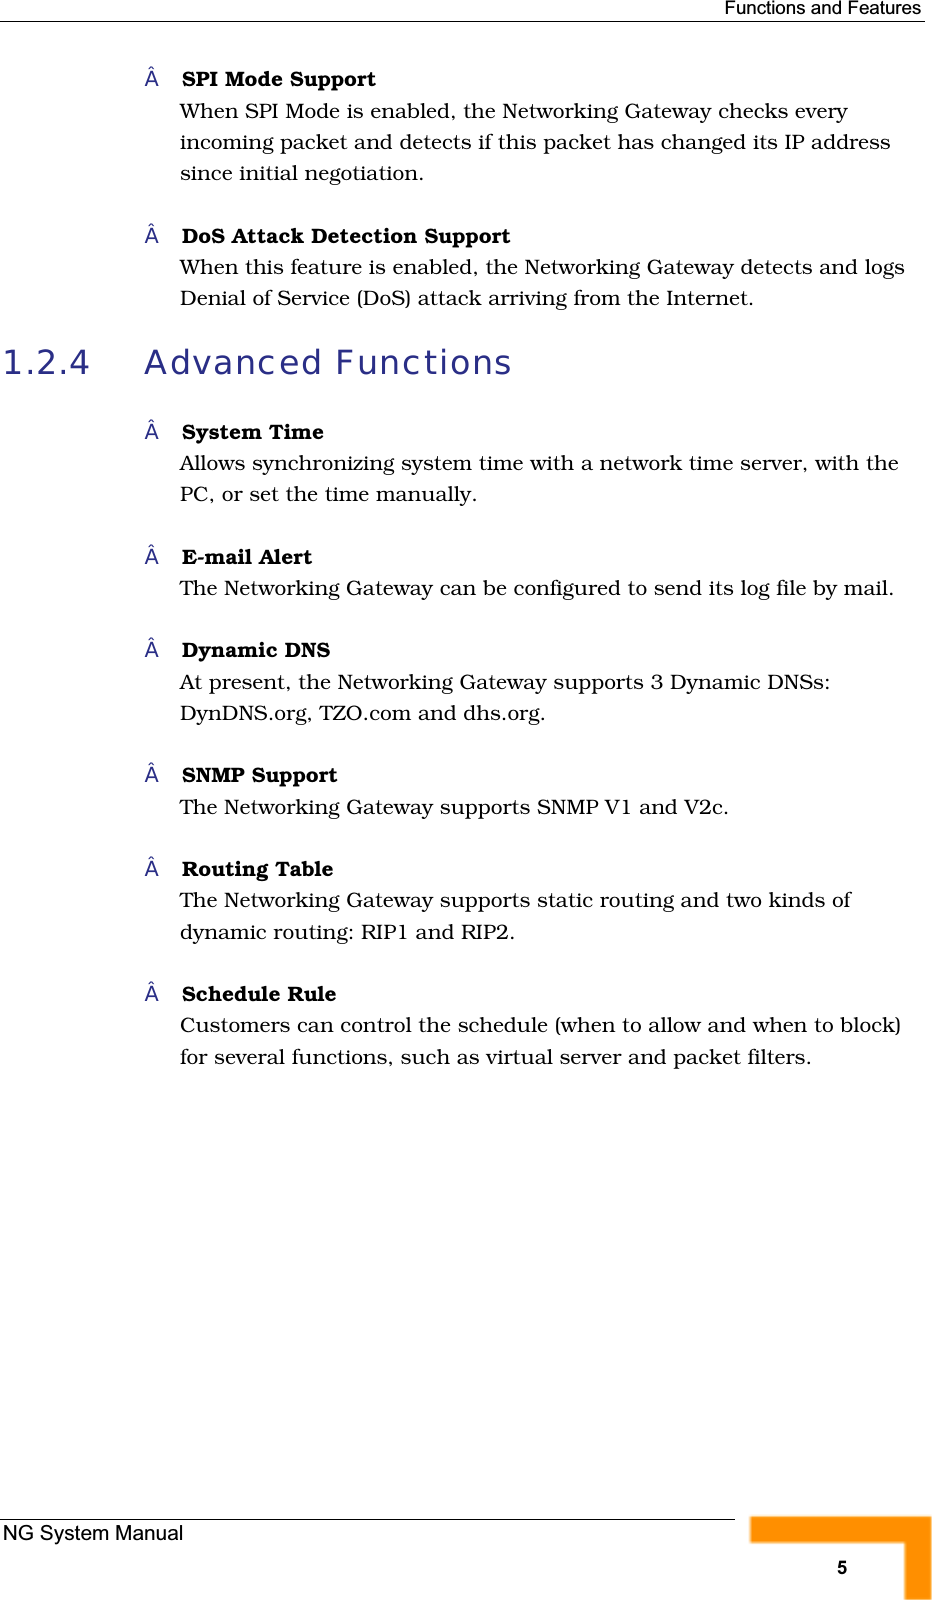 Functions and FeaturesSPI Mode SupportWhen SPI Mode is enabled, the Networking Gateway checks everyincoming packet and detects if this packet has changed its IP addresssince initial negotiation.DoS Attack Detection SupportWhen this feature is enabled, the Networking Gateway detects and logsDenial of Service (DoS) attack arriving from the Internet.1.2.4 Advanced FunctionsSystem TimeAllows synchronizing system time with a network time server, with thePC, or set the time manually.E-mail AlertThe Networking Gateway can be configured to send its log file by mail. Dynamic DNSAt present, the Networking Gateway supports 3 Dynamic DNSs:DynDNS.org, TZO.com and dhs.org.SNMP SupportThe Networking Gateway supports SNMP V1 and V2c.Routing Table The Networking Gateway supports static routing and two kinds ofdynamic routing: RIP1 and RIP2.Schedule RuleCustomers can control the schedule (when to allow and when to block)for several functions, such as virtual server and packet filters.NG System Manual5